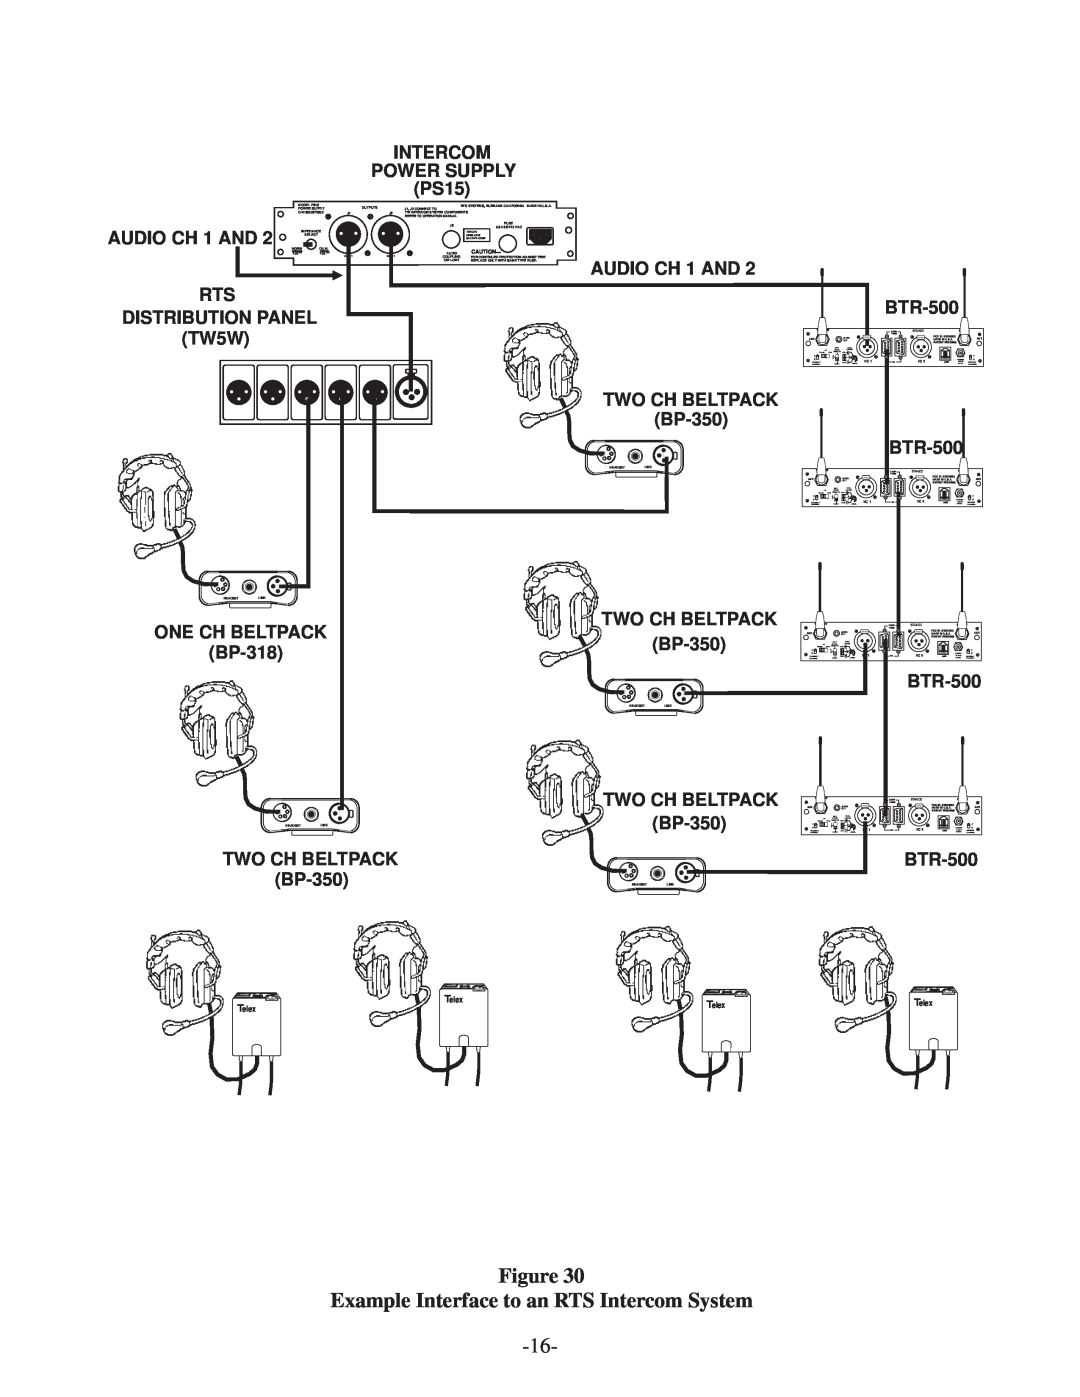 Telex BTR-500/600C operating instructions Example Interface to an RTS Intercom System 